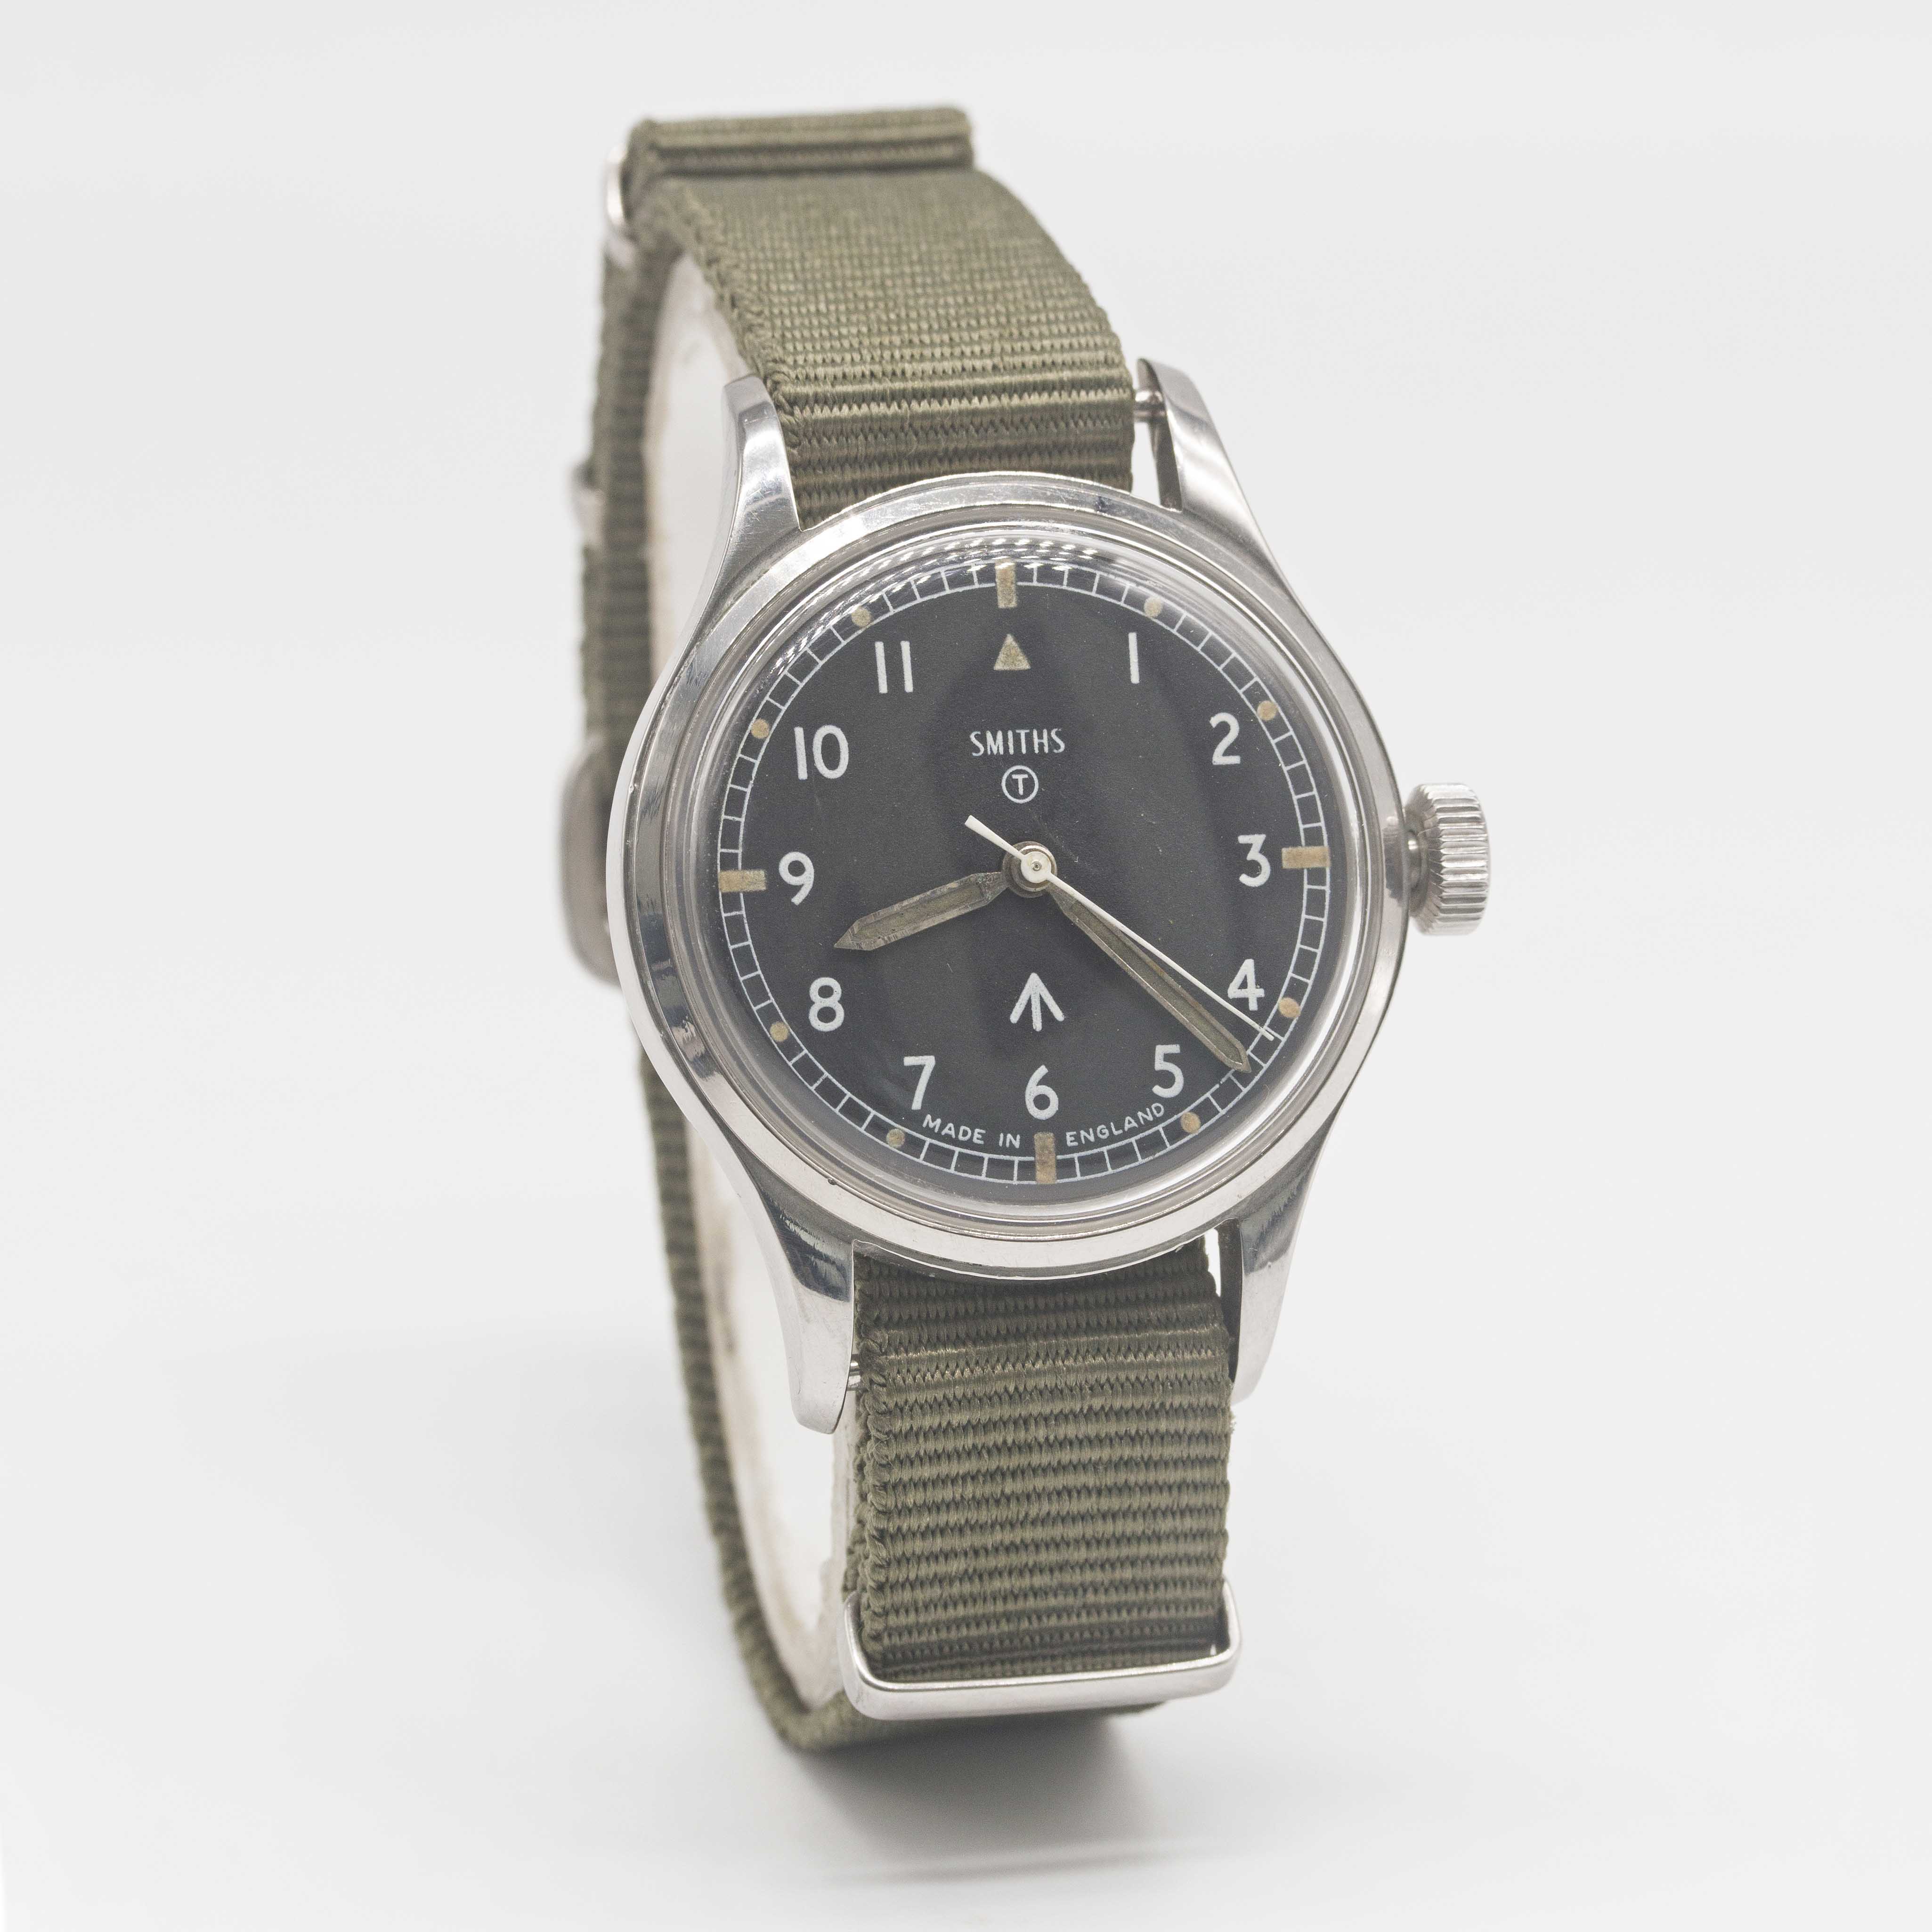 A GENTLEMAN'S STAINLESS STEEL BRITISH MILITARY SMITHS WRIST WATCH DATED 1970 Movement: 17J, manual - Image 4 of 8